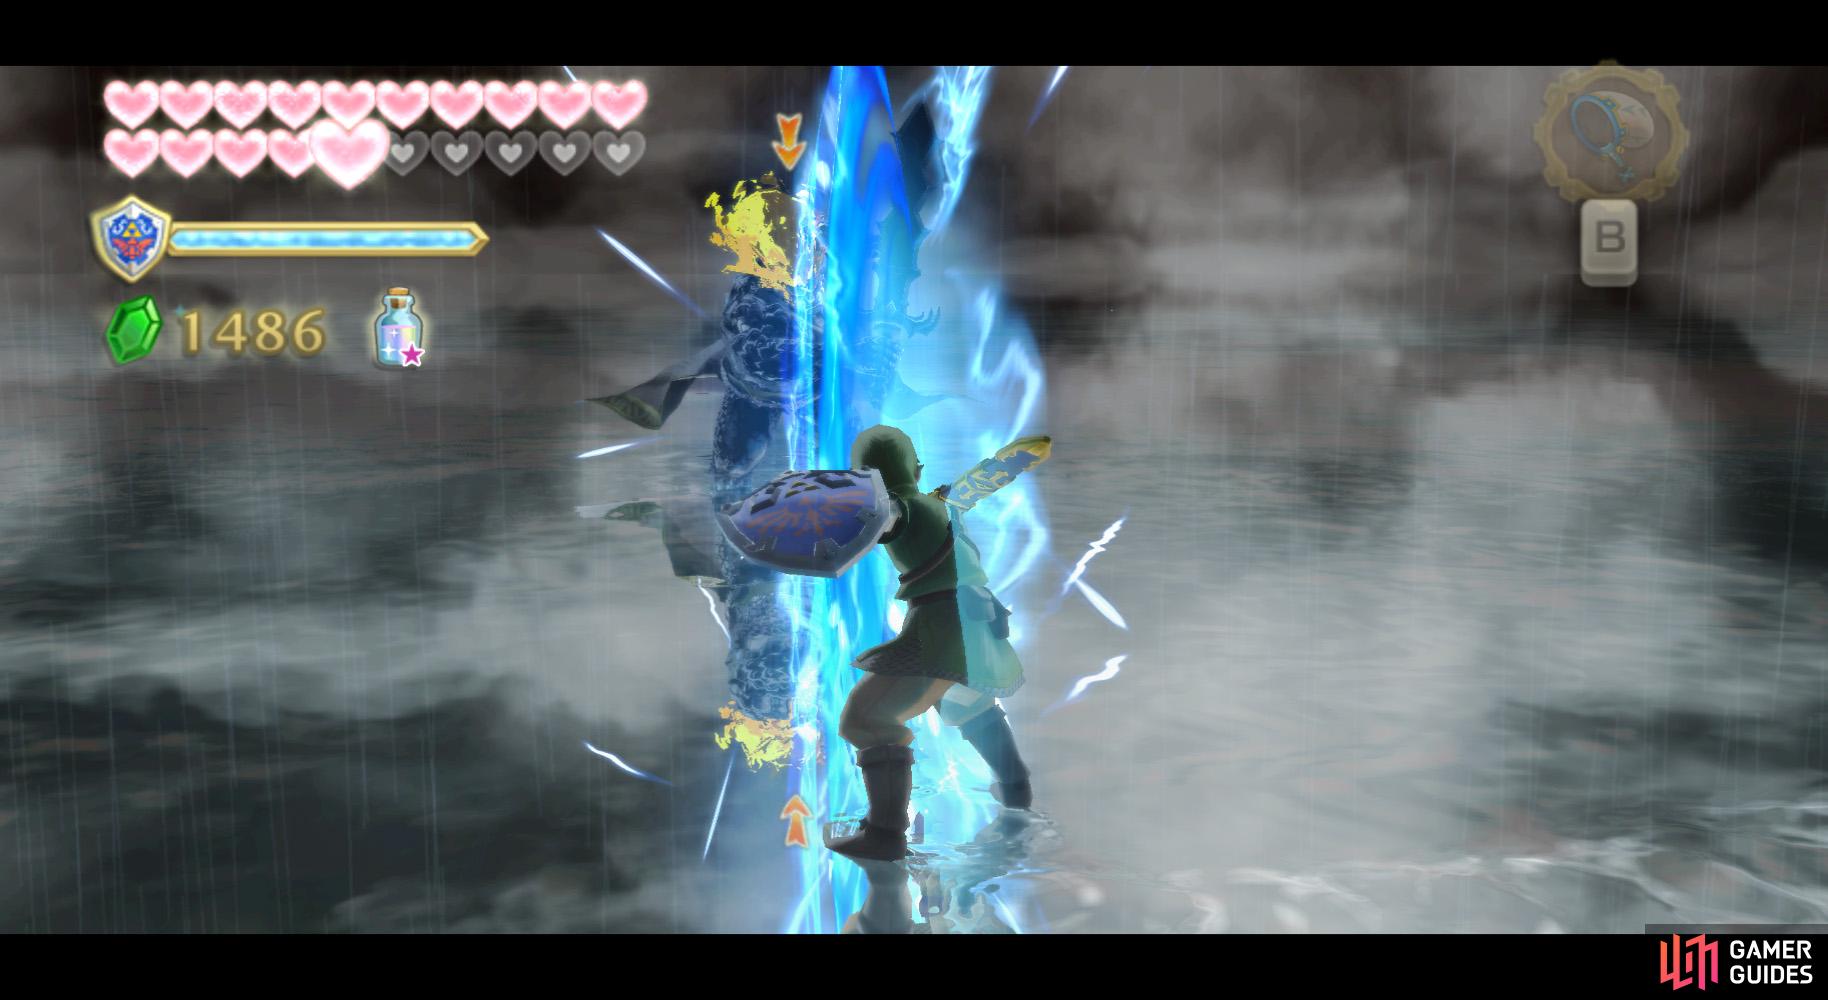 While your sword's charged with lightning, hit Demise with a lightning disc to stun him.